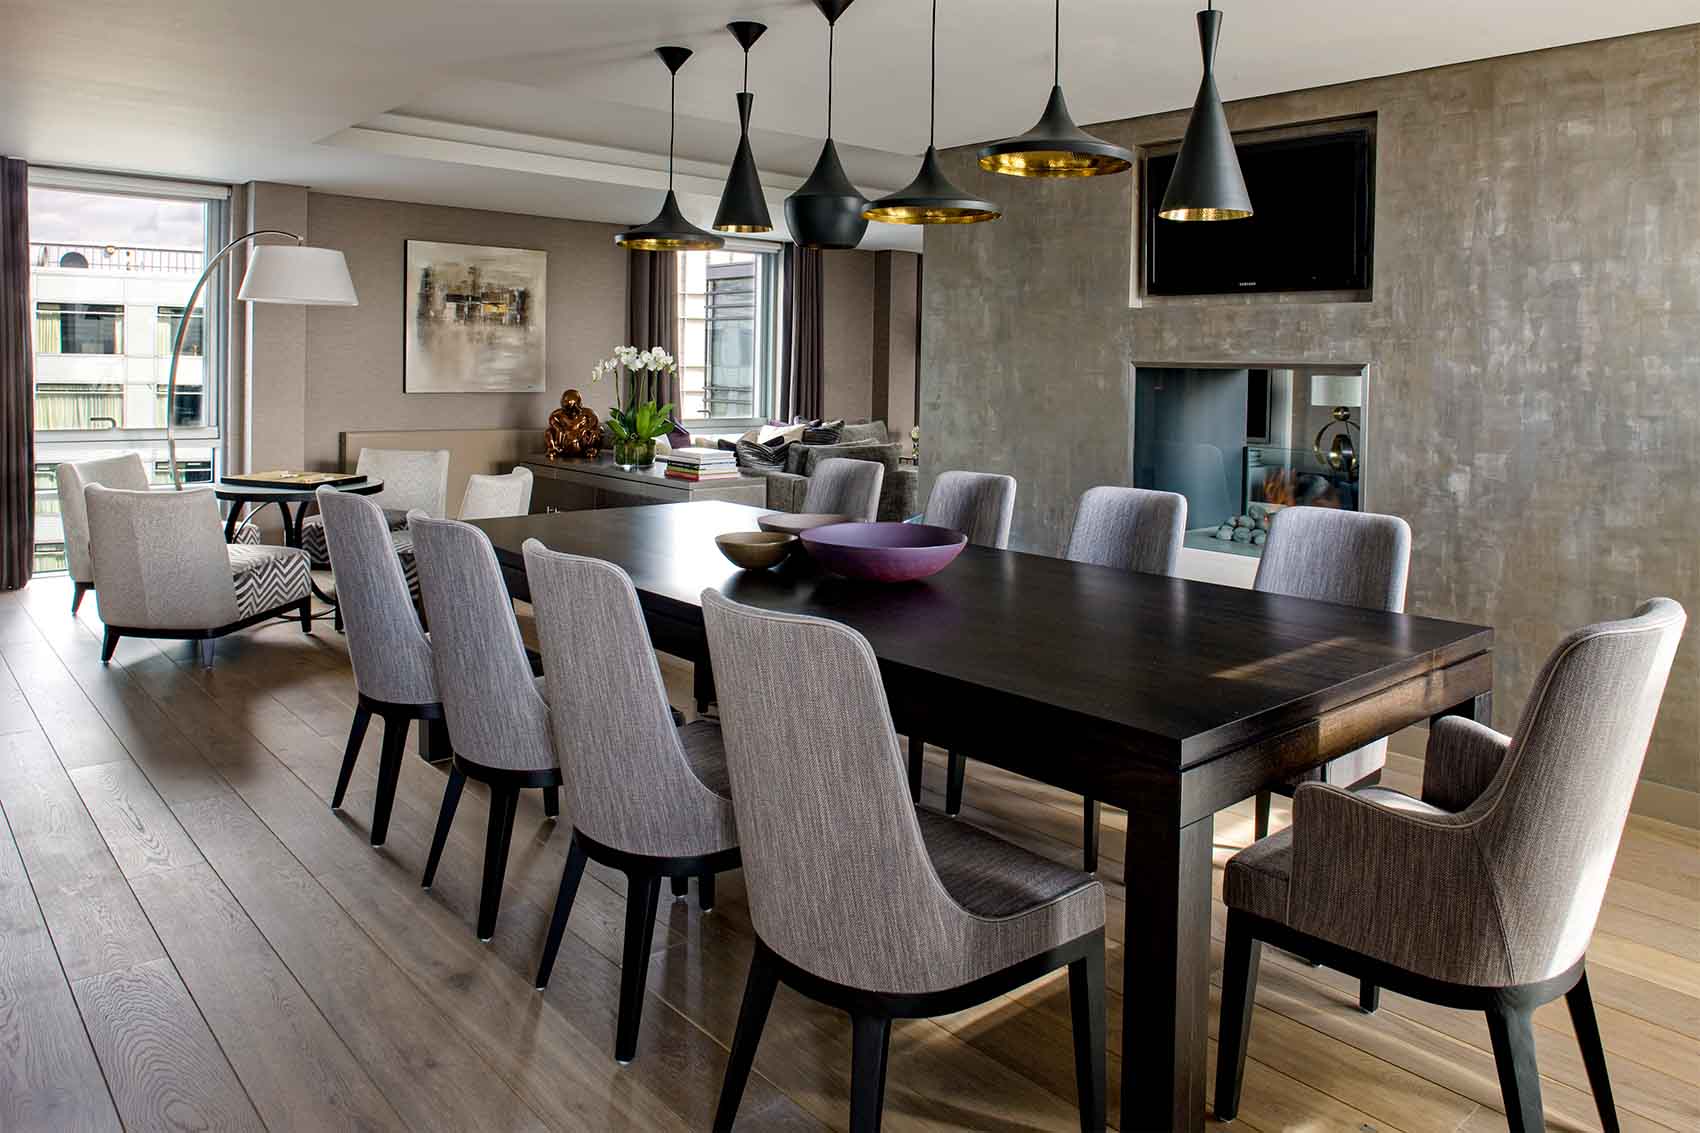 Dining space design by Rene Dekker, Minotti dining chairs, timber floor, specialist plaster walls